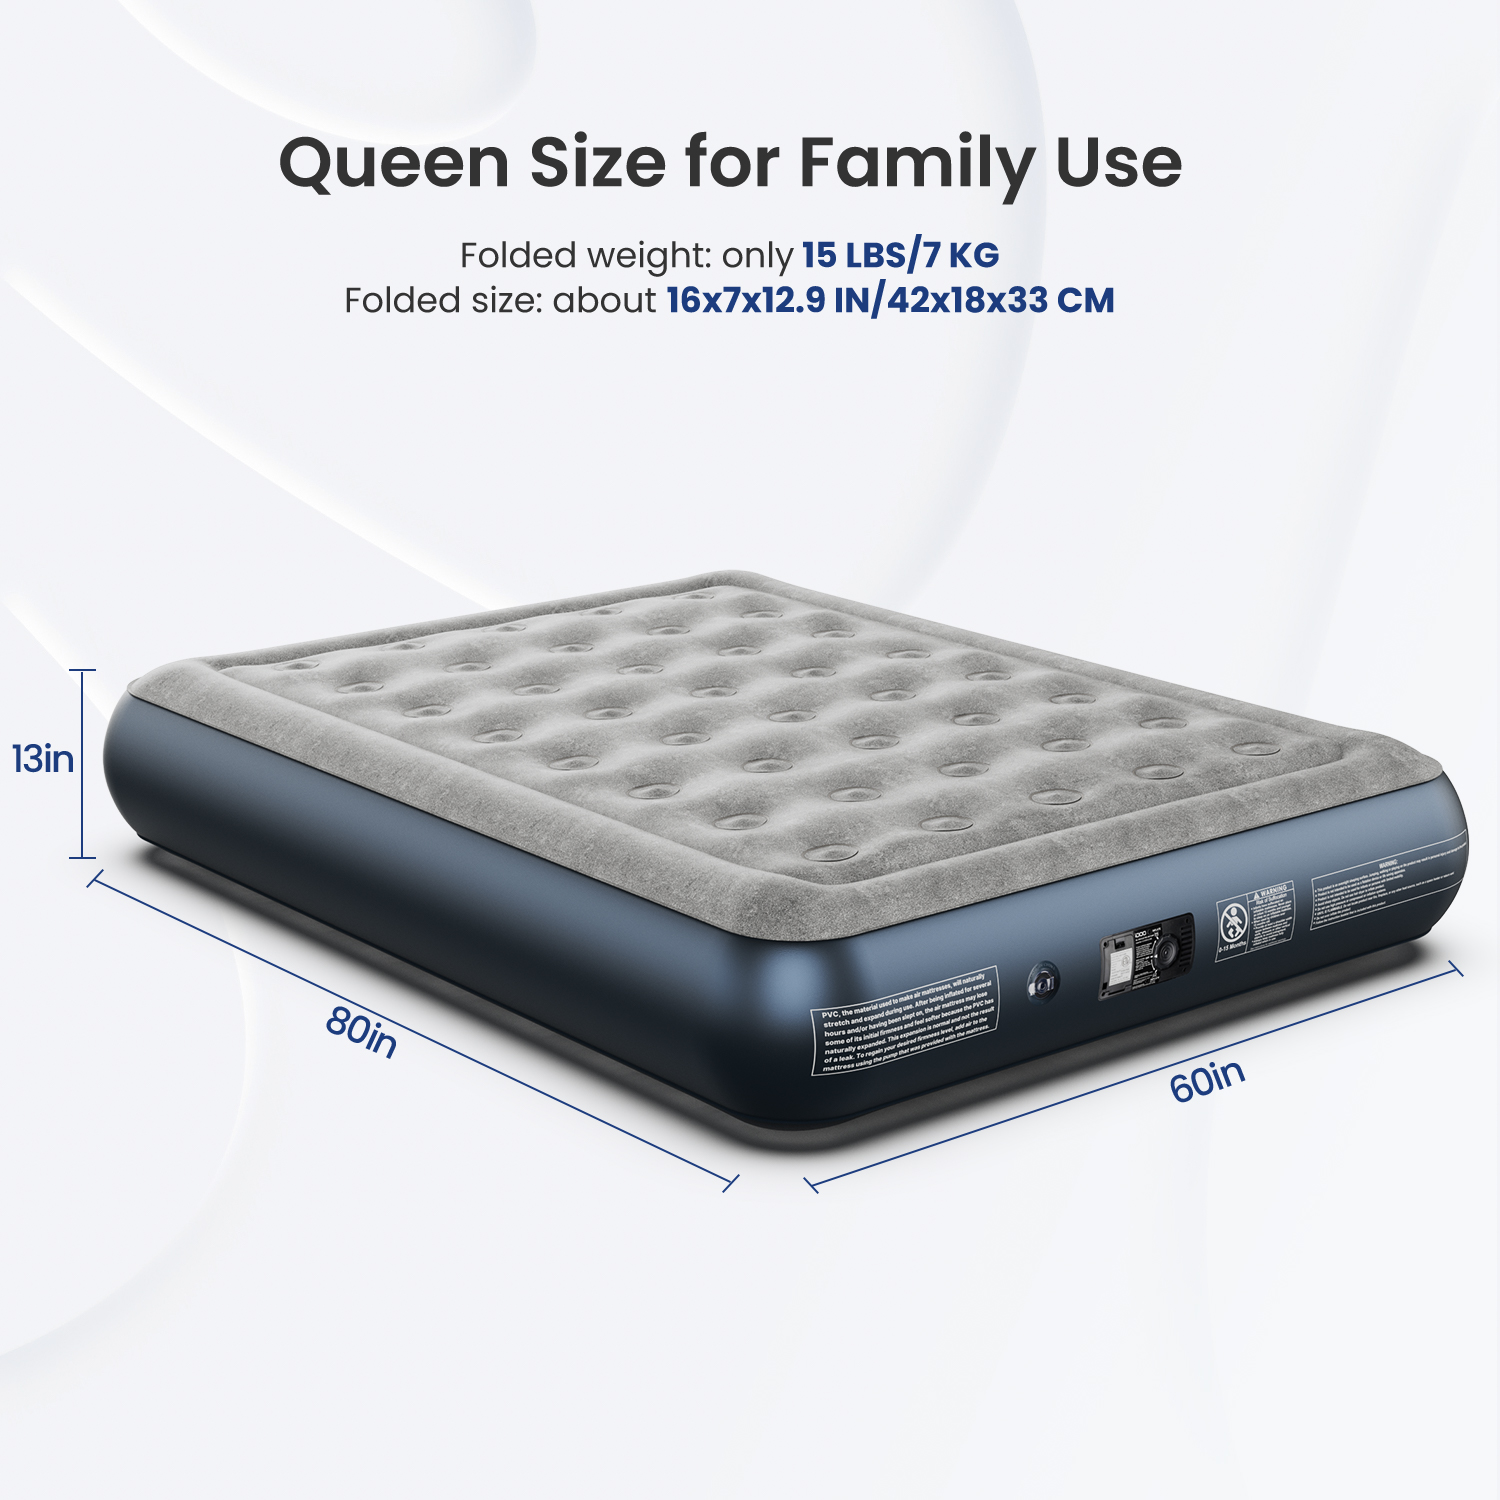 iDOO Queen Size Air Mattress, Inflatable Airbed with Built-in Pump, 650lb MAX - image 4 of 10